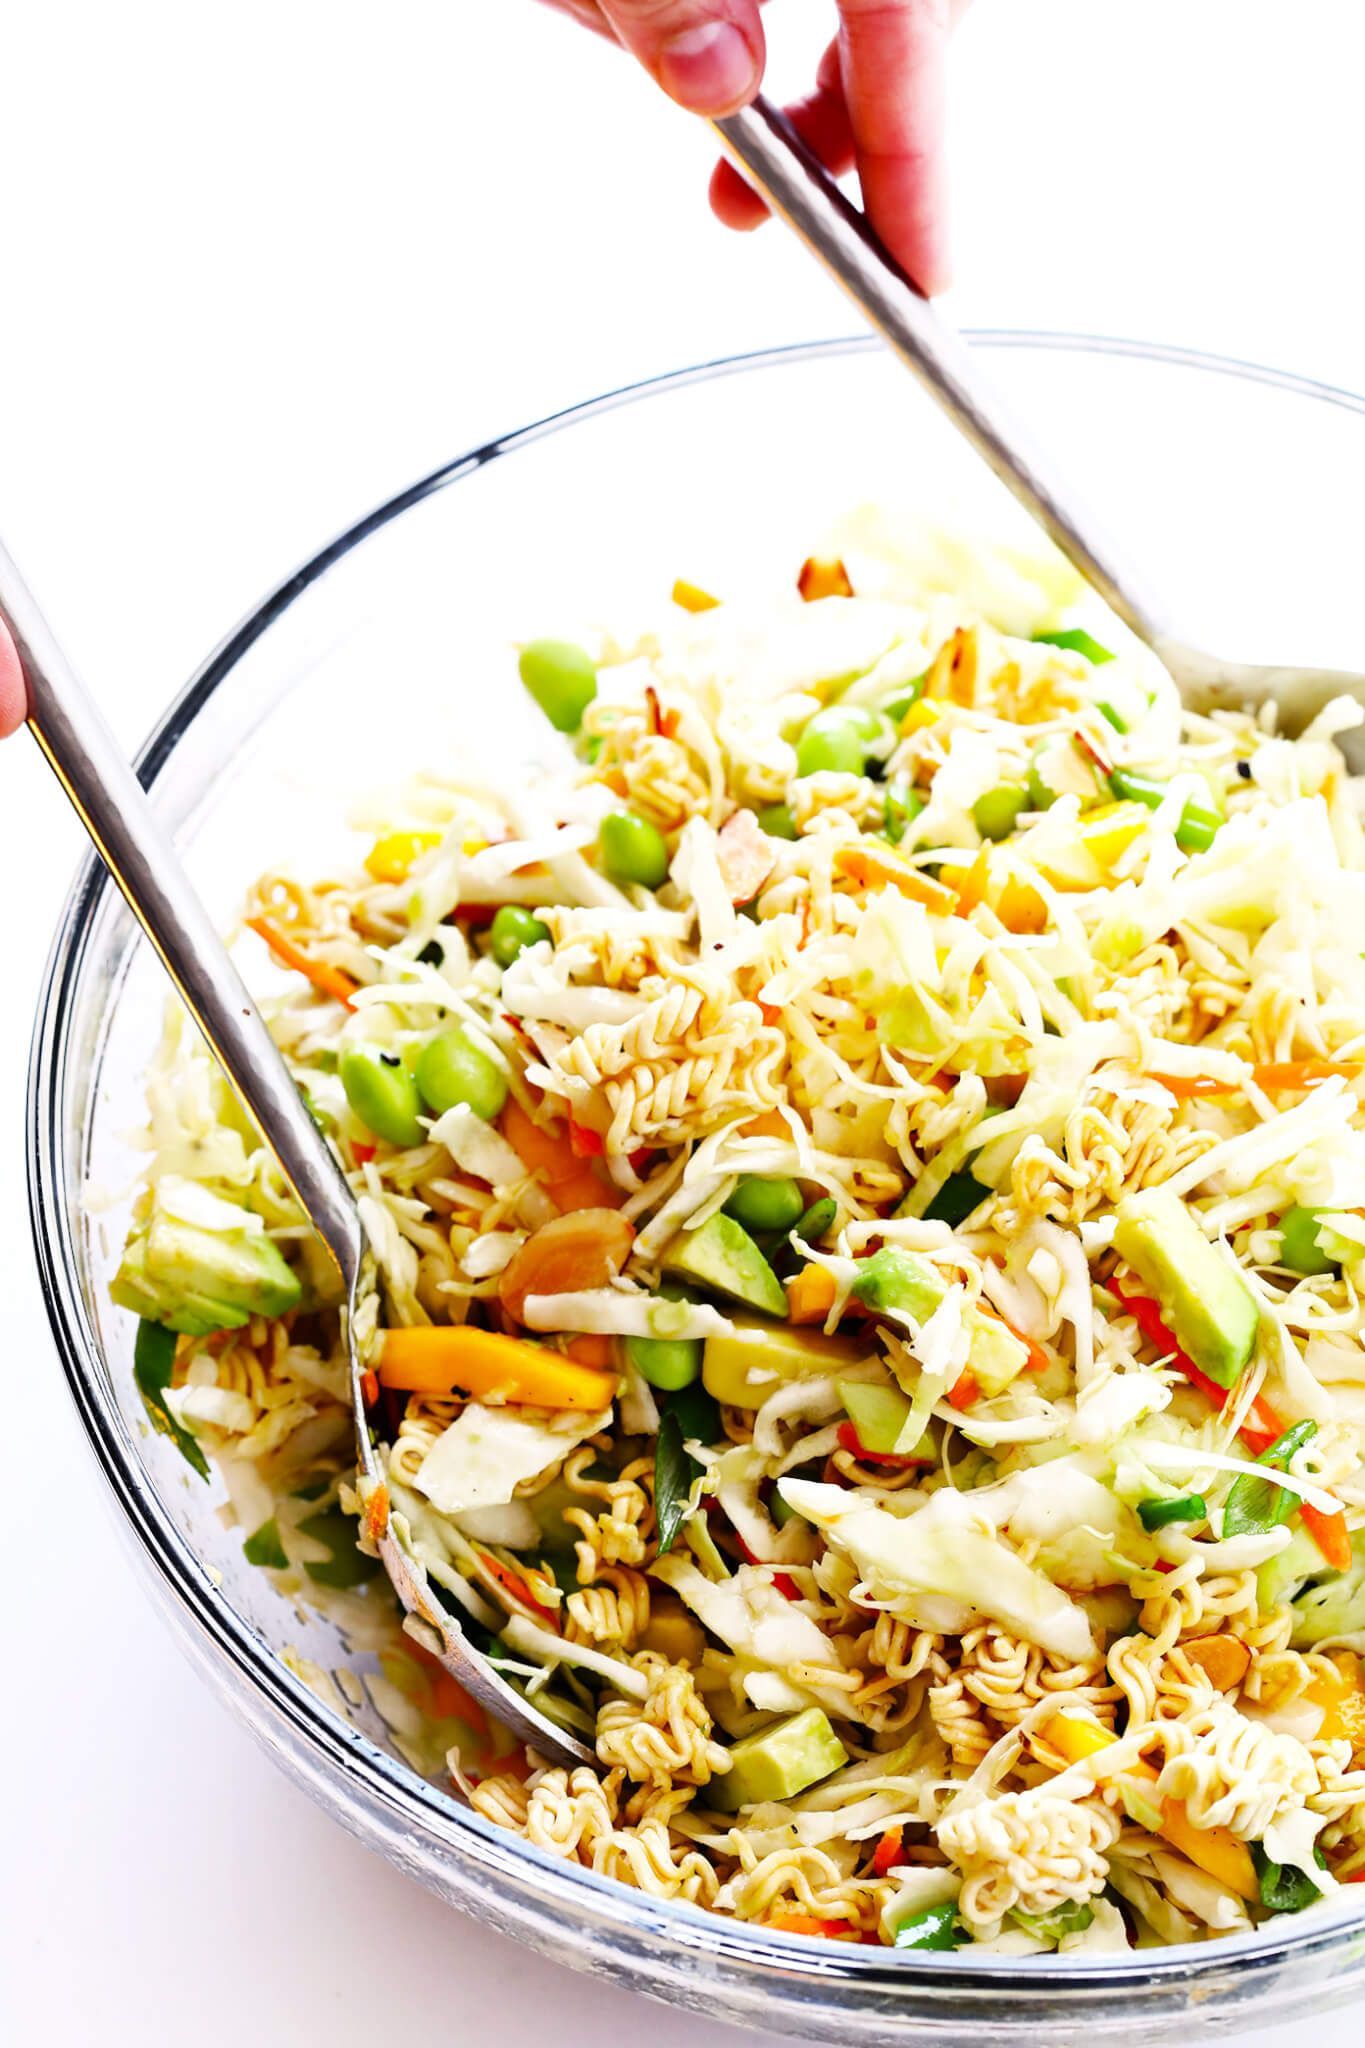 Asian cabbage salad with ramen noodles